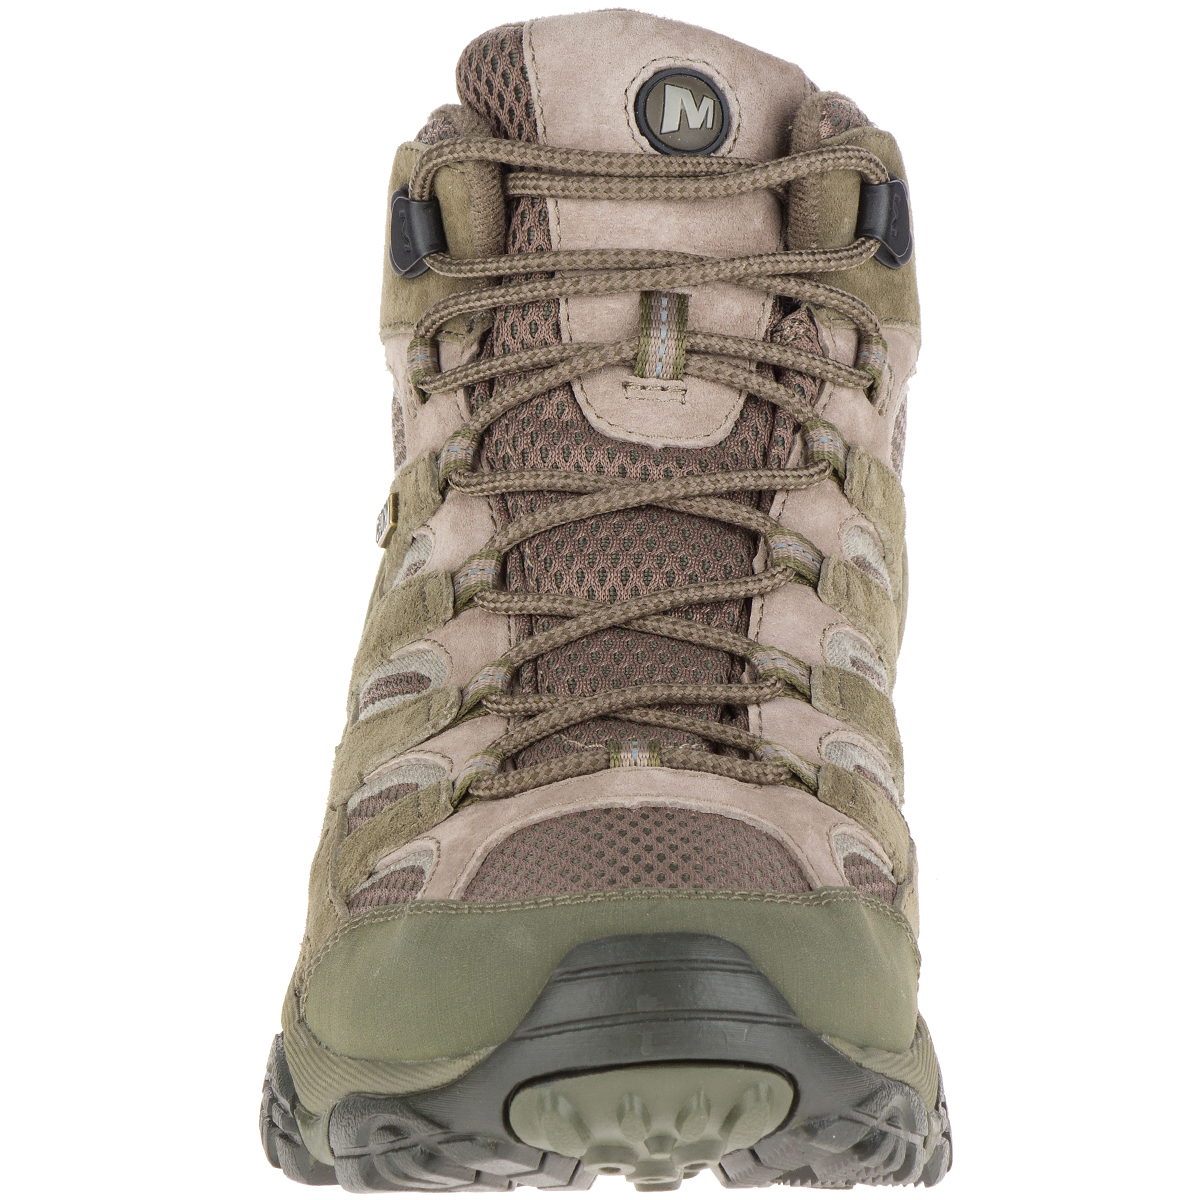 merrell dusty olive boots